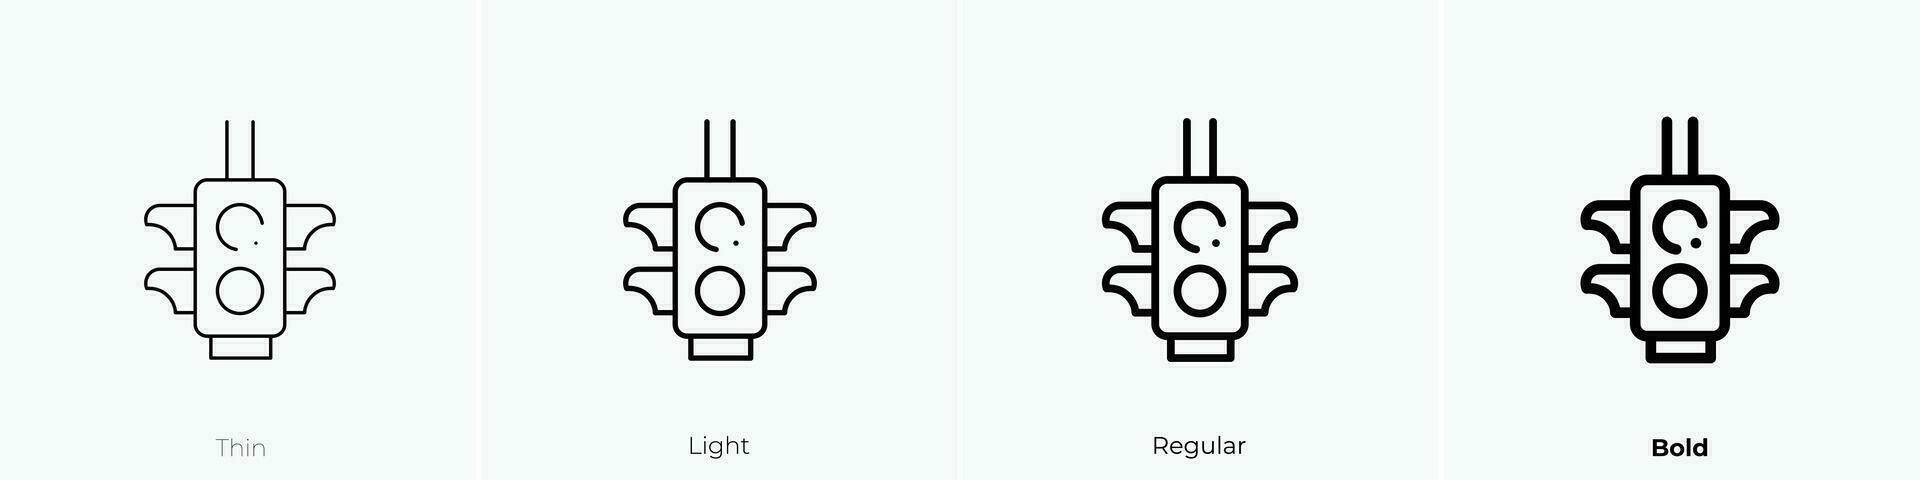 traffic lights icon. Thin, Light, Regular And Bold style design isolated on white background vector